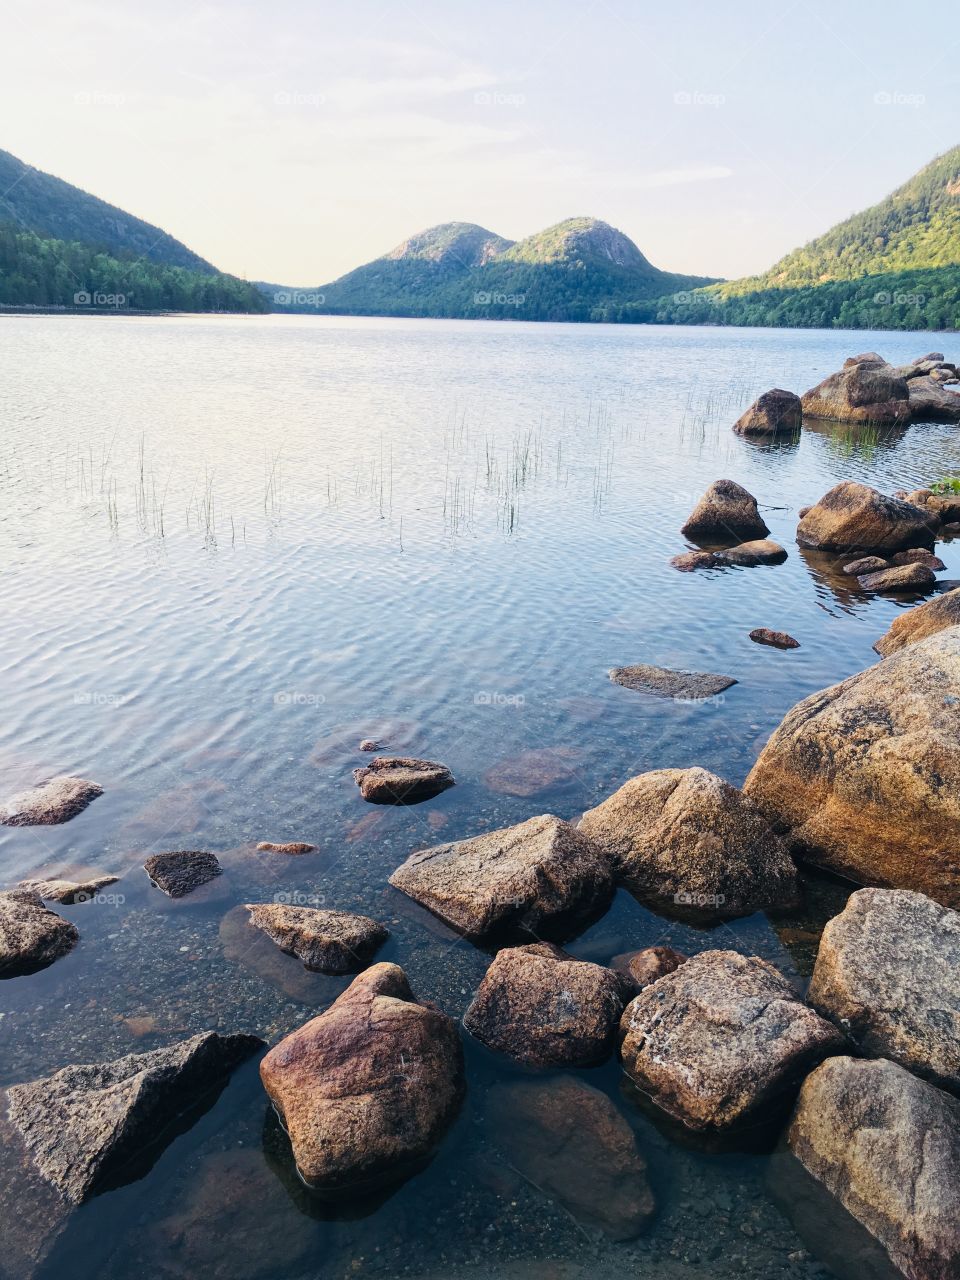 Bubble Mountains from Jordan Pond at Acadia National Park 